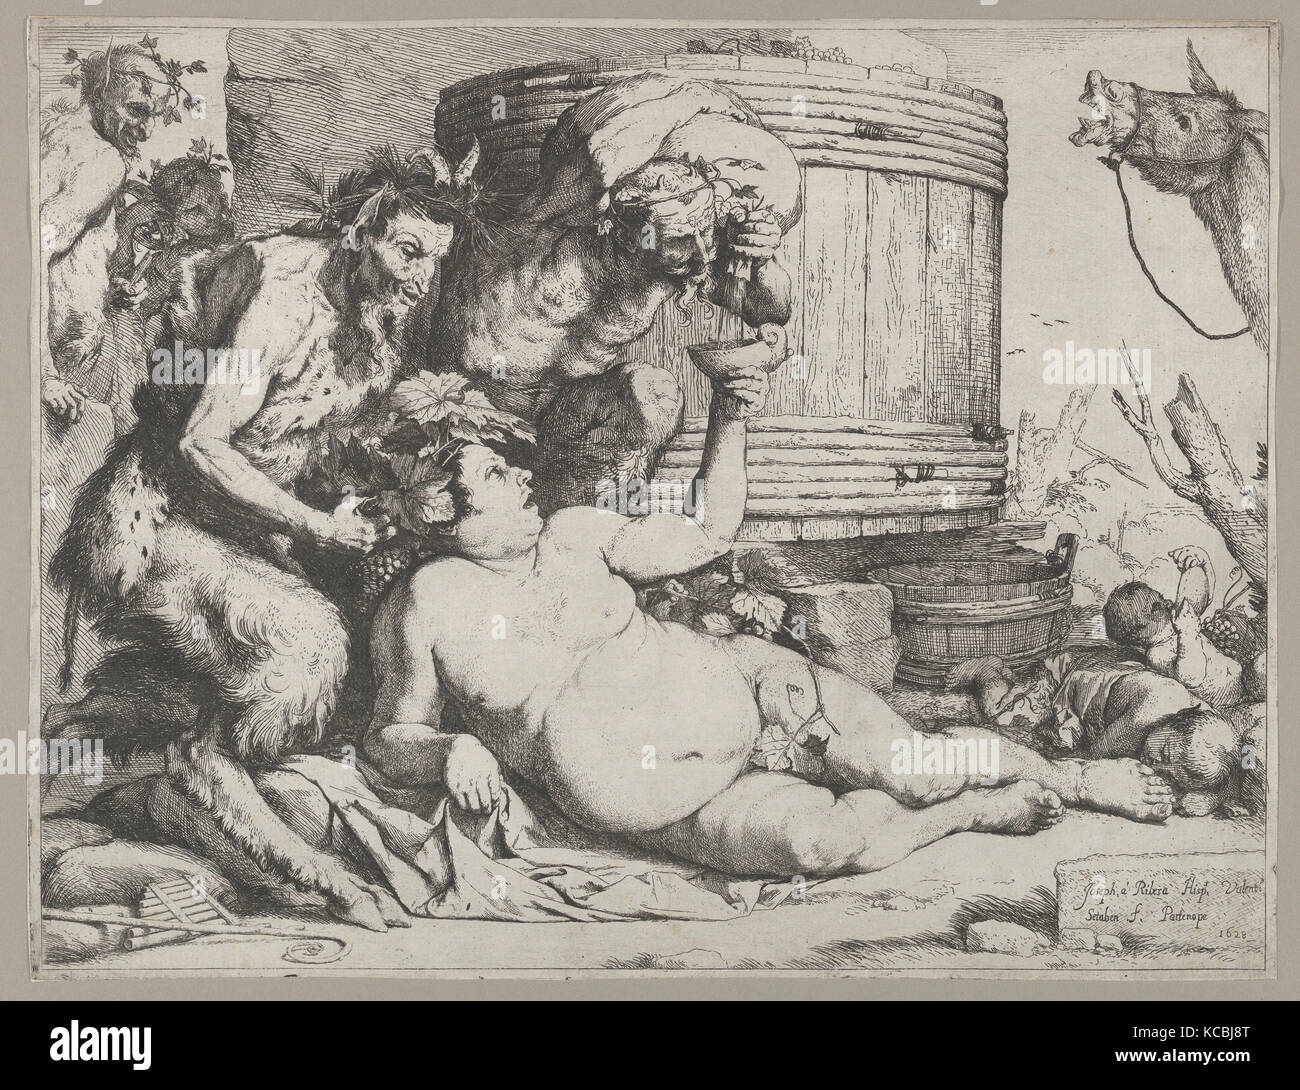 Drunken Silenus holding a cup aloft into which a Satyr pours wine, Jusepe de Ribera, 1628 Stock Photo